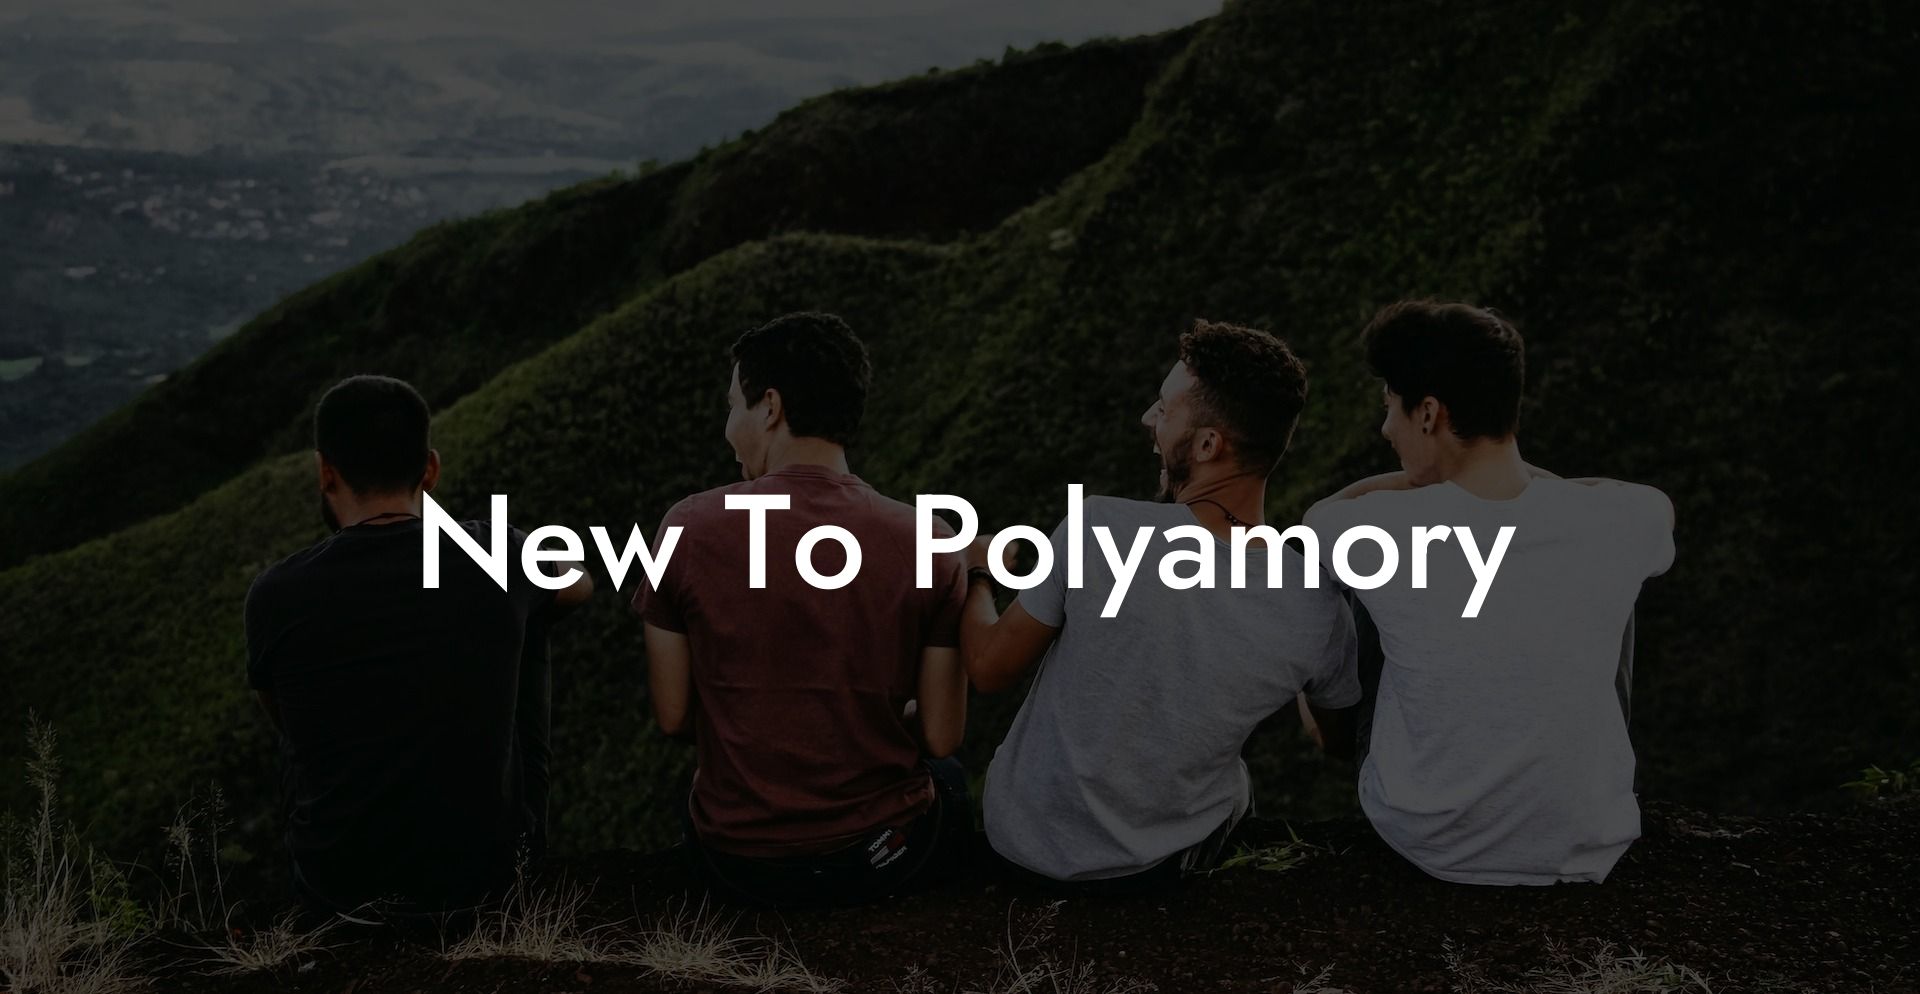 New To Polyamory